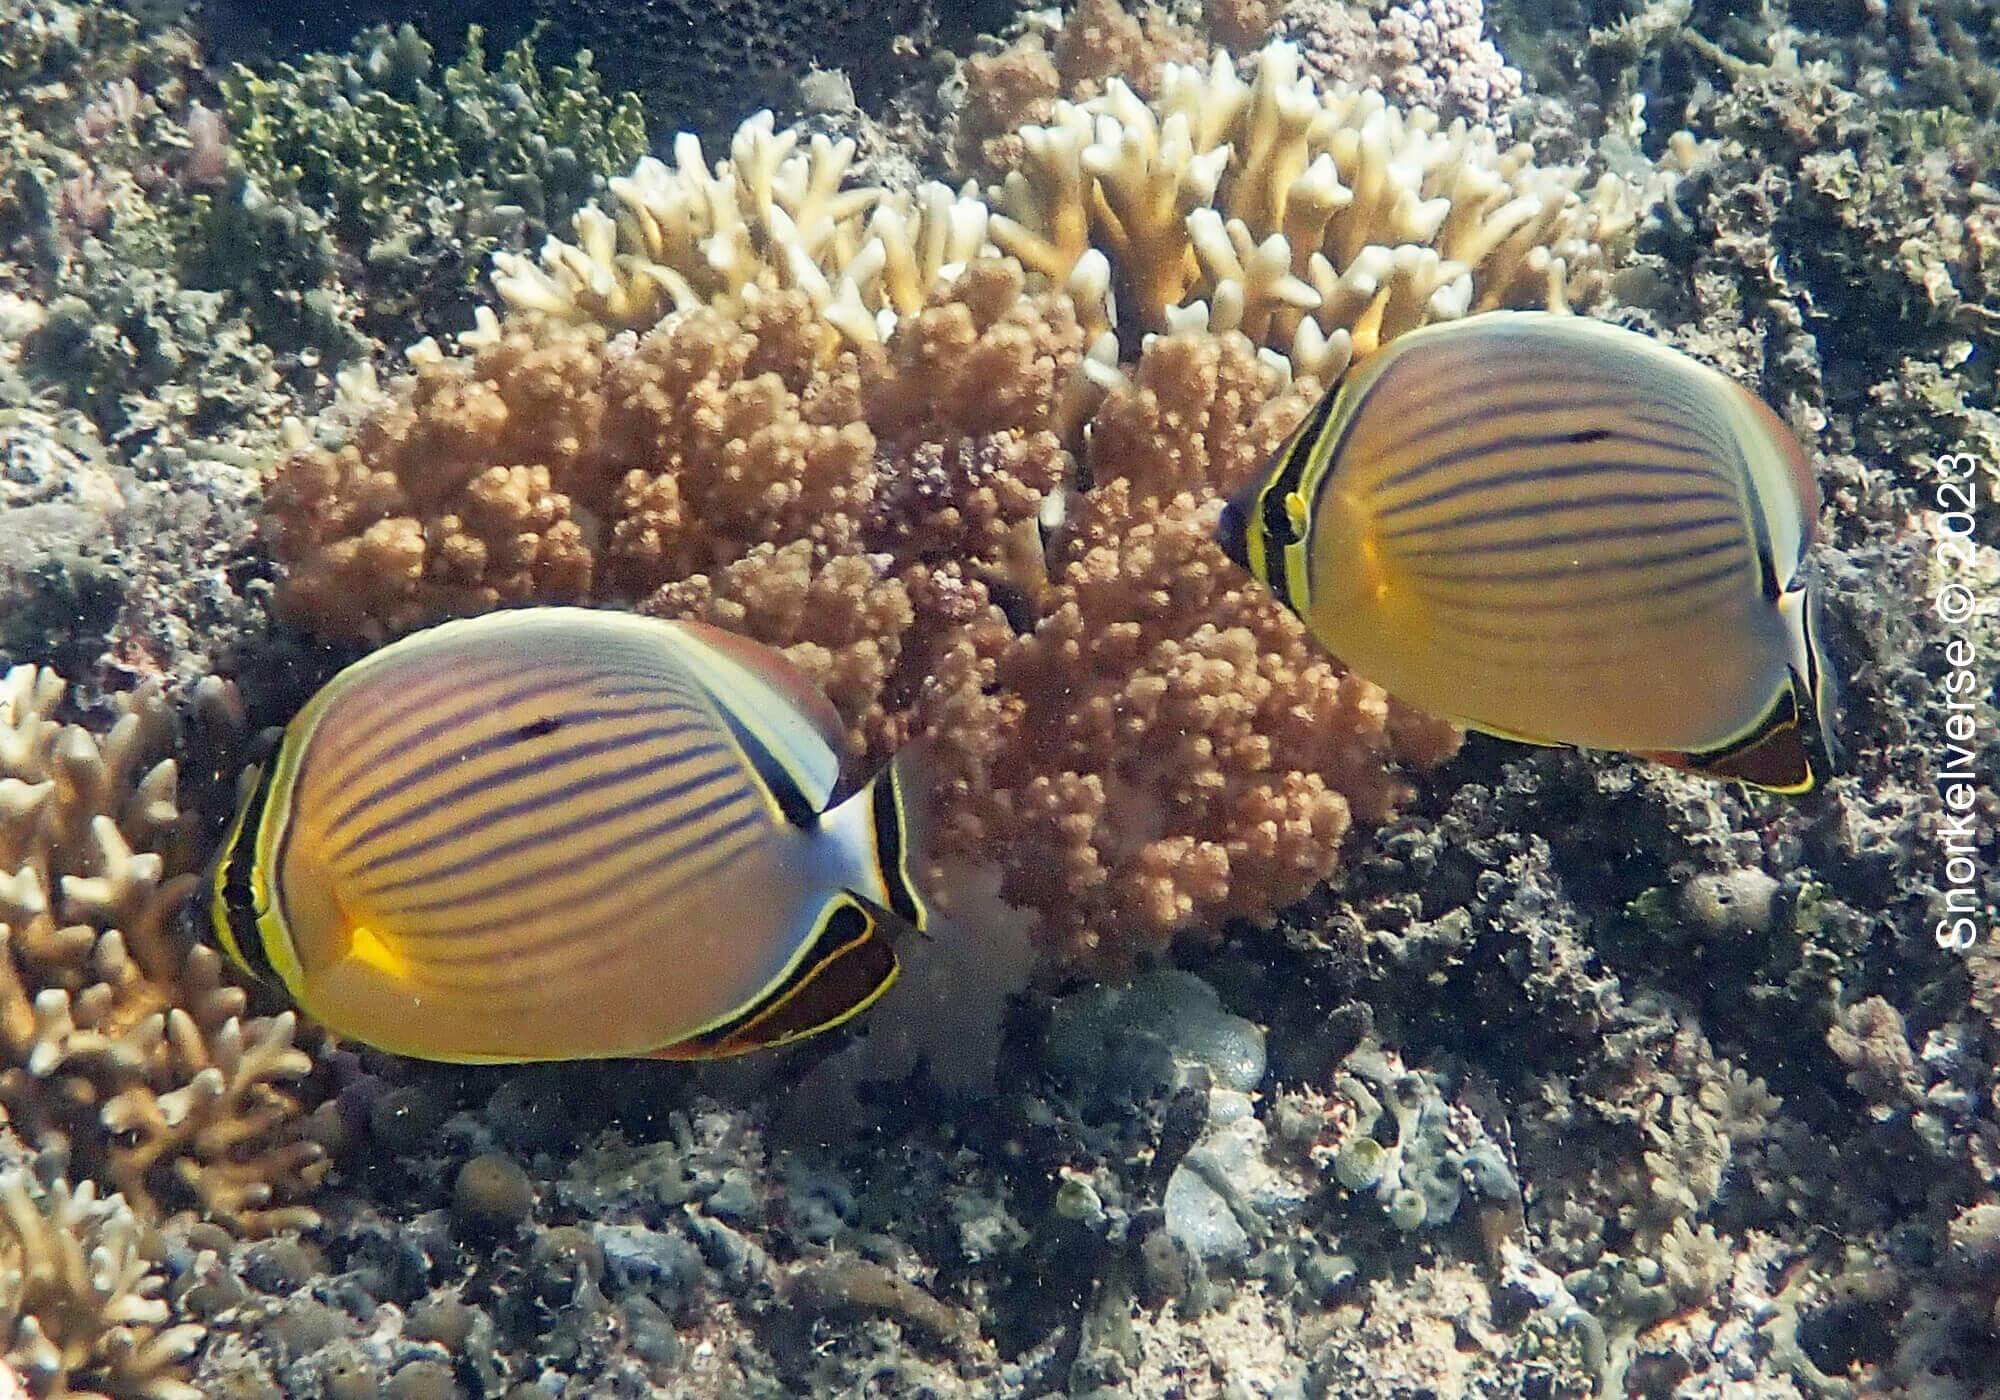 Parrotfish and Butterflyfish, Coral Island